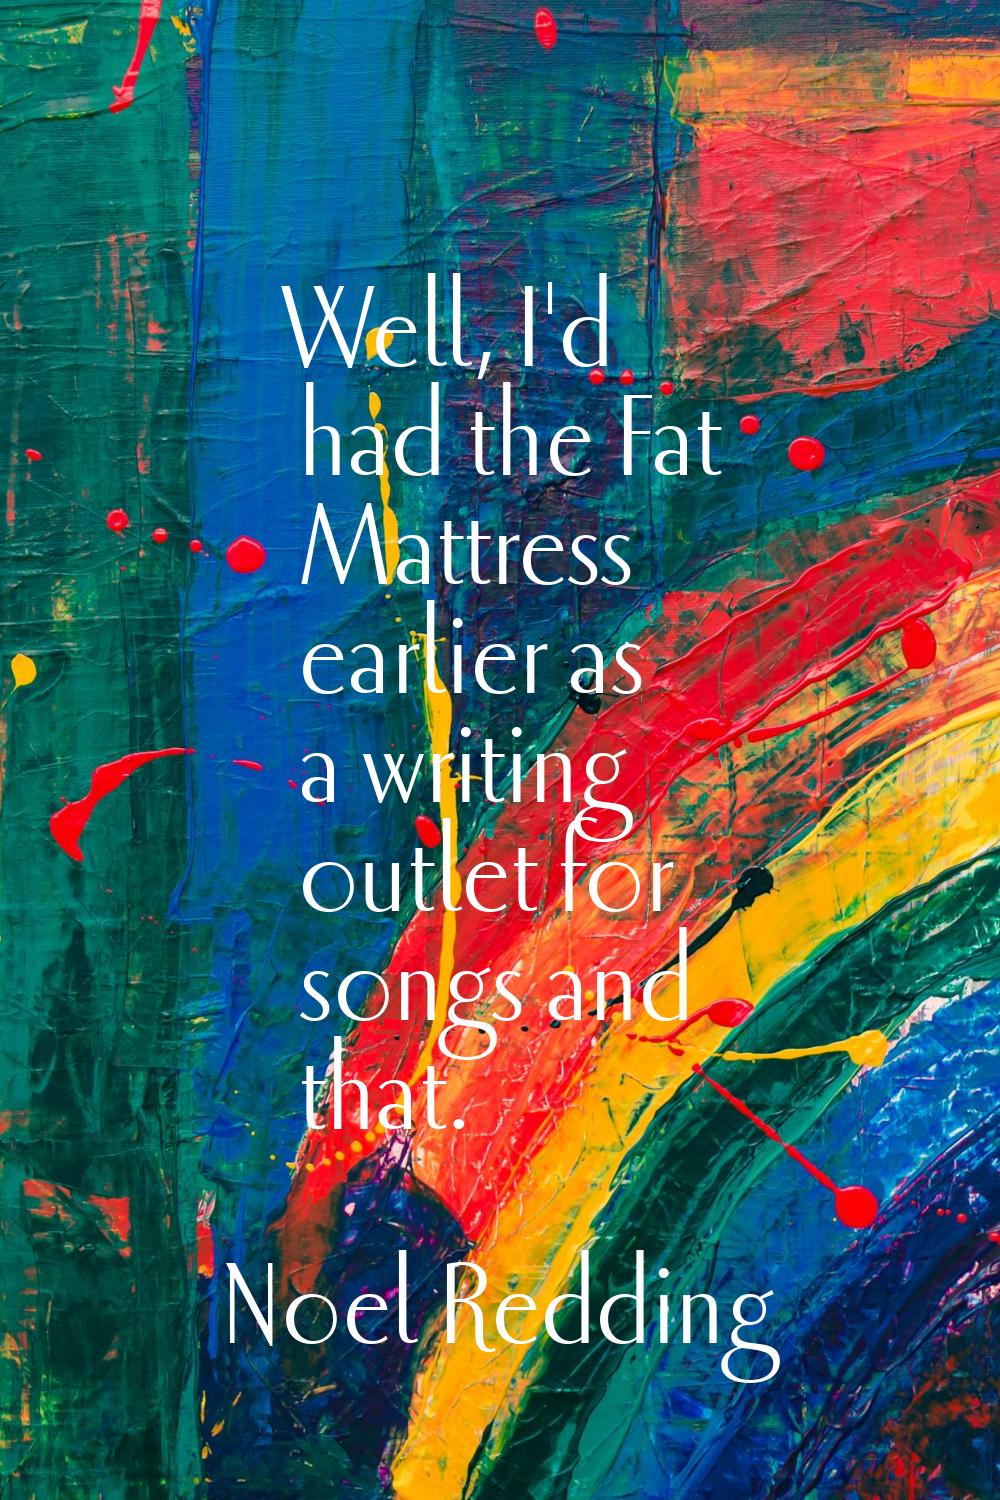 Well, I'd had the Fat Mattress earlier as a writing outlet for songs and that.